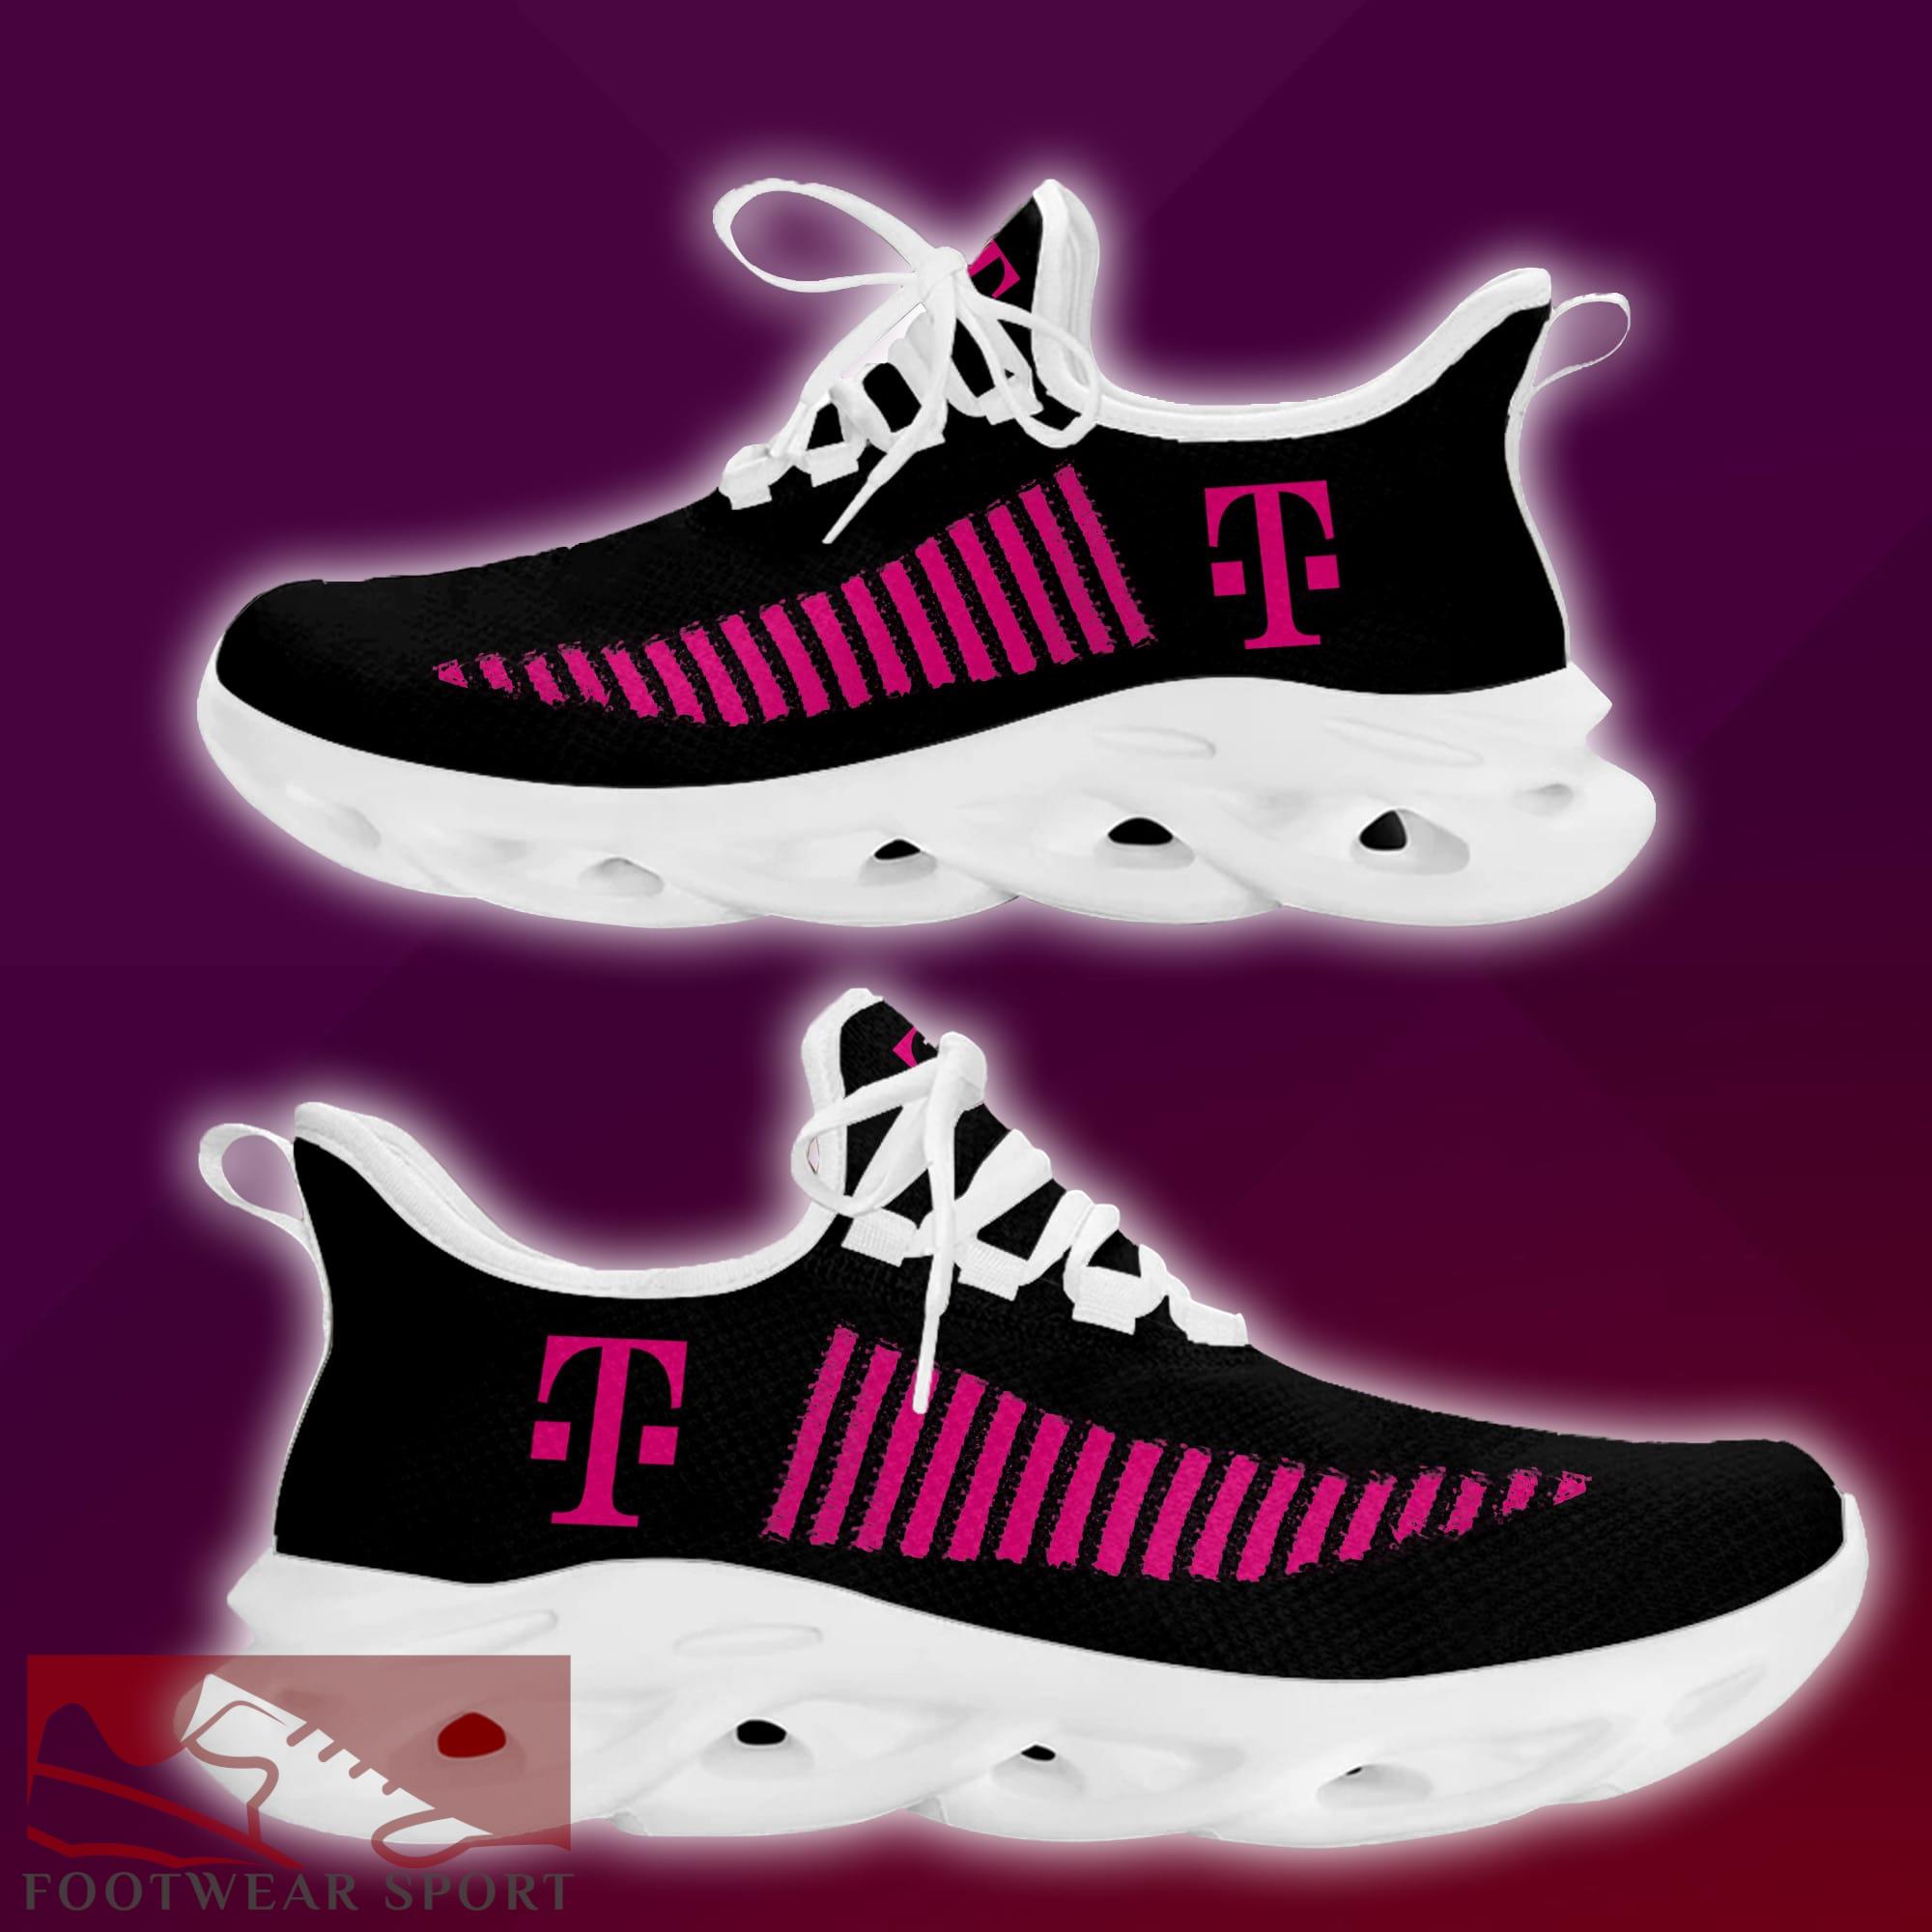 t-mobile Brand New Logo Max Soul Sneakers Inspiration Running Shoes Gift - t-mobile New Brand Chunky Shoes Style Max Soul Sneakers Photo 2